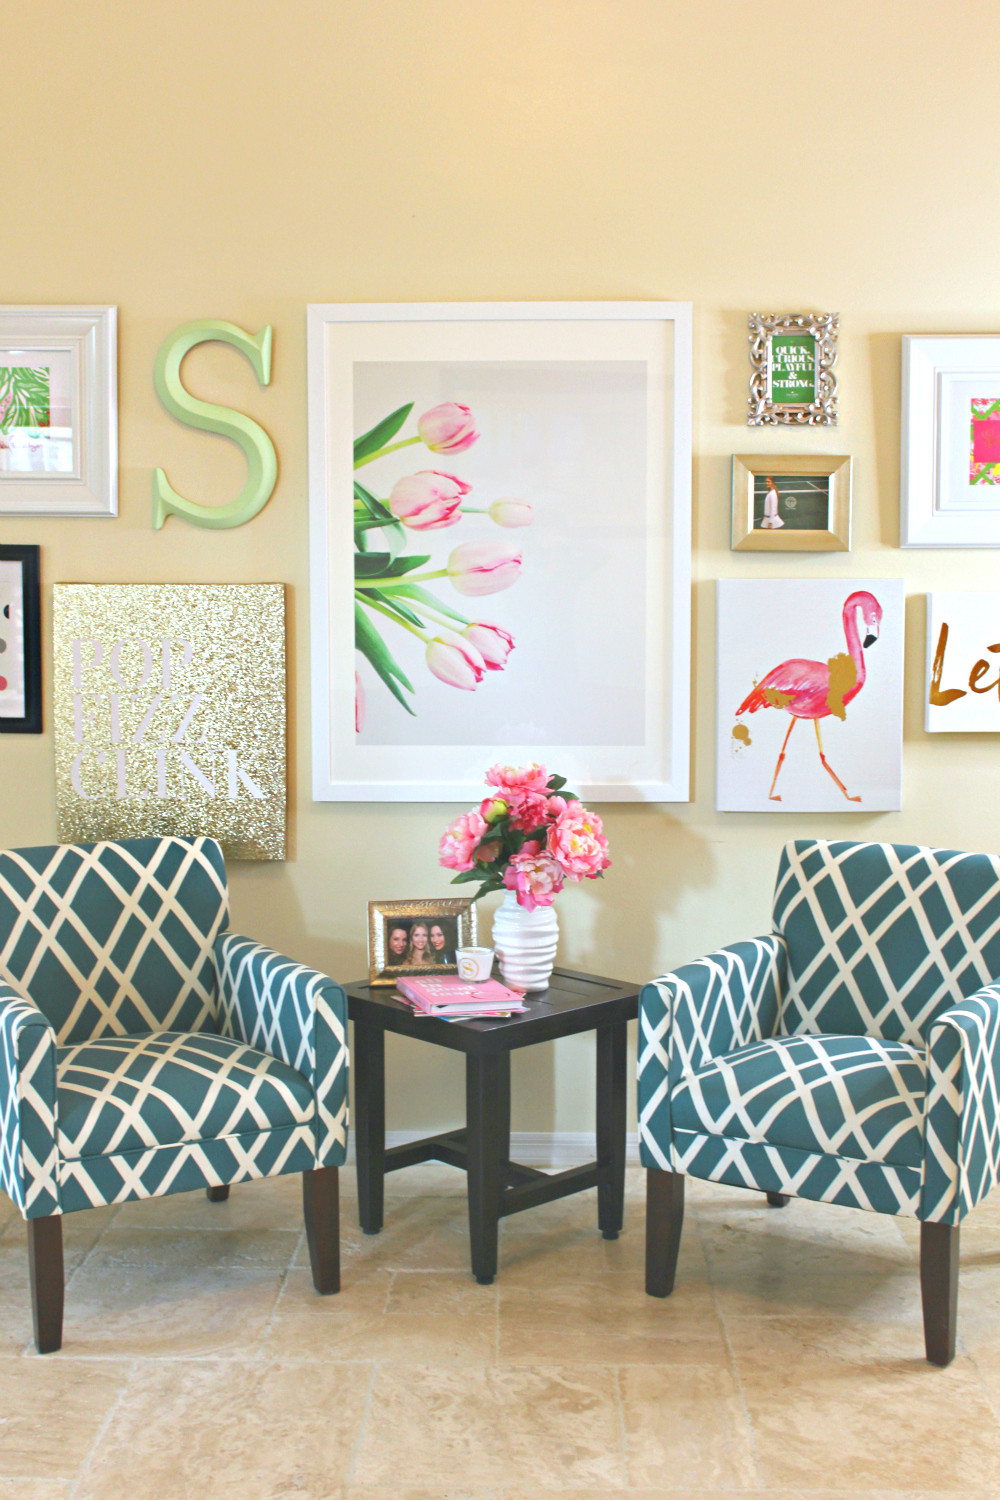 Living Room Wall Art
 Lilly Pulitzer Inspired Wall Art Collage